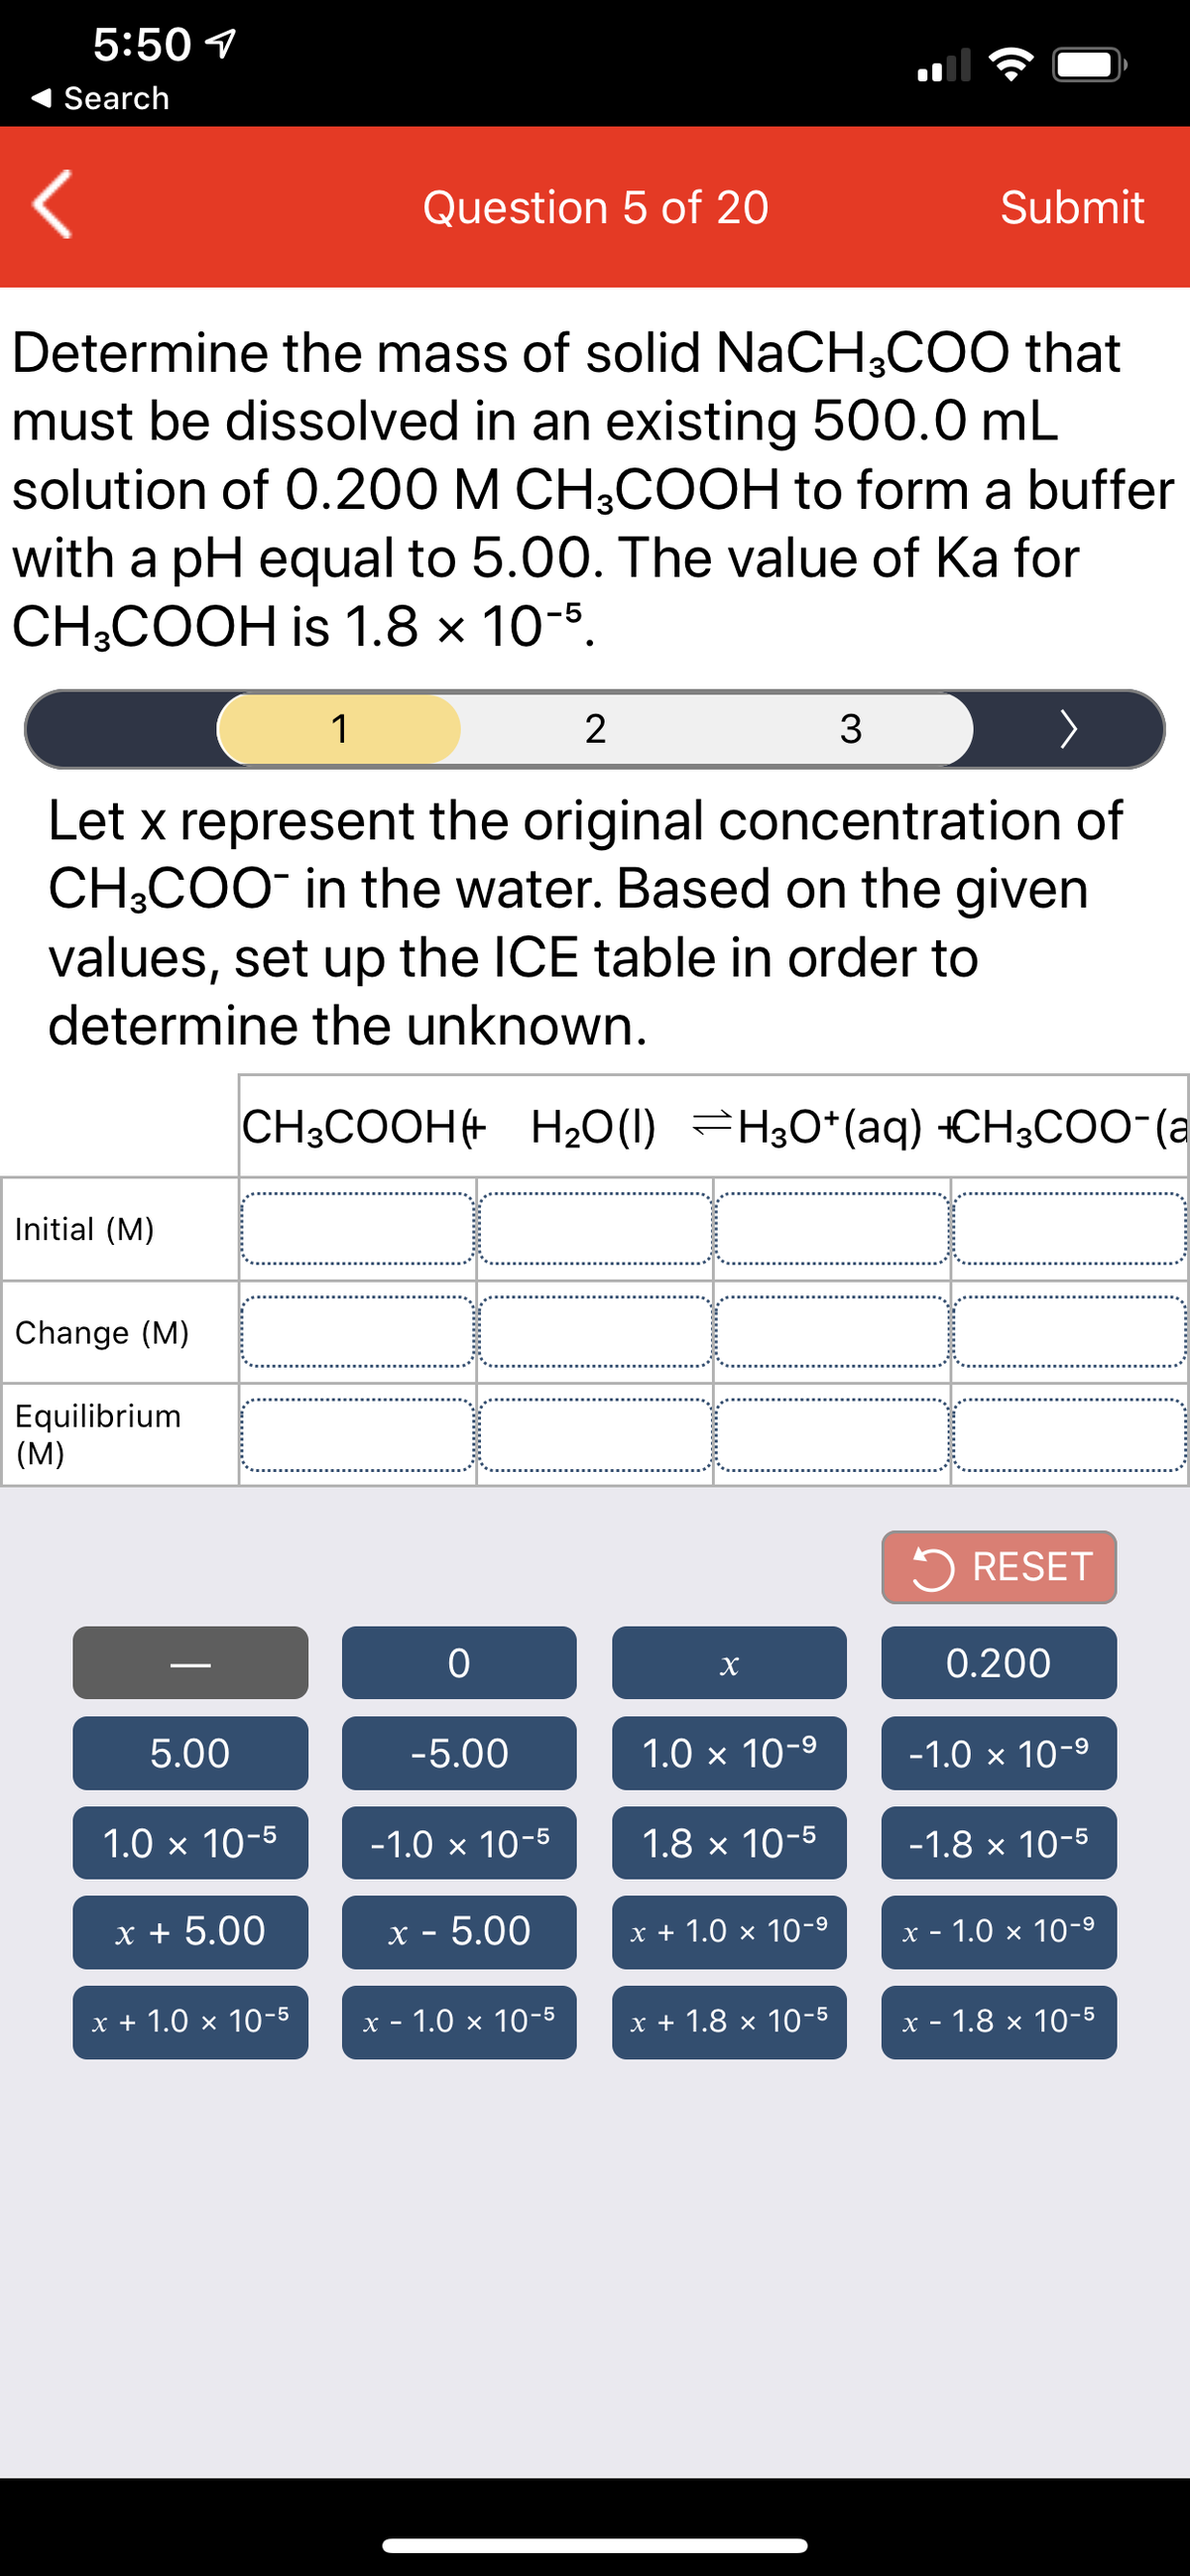 5:50 1
Search
Question 5 of 20
Submit
Determine the mass of solid NaCH;COO that
must be dissolved in an existing 500.0 mL
solution of 0.200 M CH3COOH to form a buffer
with a pH equal to 5.00. The value of Ka for
CH-COОH is 1.8 х 10-5.
1
2
Let x represent the original concentration of
CH;COO in the water. Based on the given
values, set up the ICE table in order to
determine the unknown.
CH3COOH+ H20(1) =H;O*(aq) +CH3COO-(a
Initial (M)
Change (M)
Equilibrium
(M)
5 RESET
0.200
5.00
-5.00
1.0 x 10-9
-1.0 × 10-9
1.0 x 10-5
-1.0 x 10-5
1.8 x 10-5
-1.8 x 10-5
х+ 5.00
x - 5.00
x + 1.0 × 10-9
х - 1.0 х 10-9
1.0 x 10-5
x - 1.0 × 10-5
x + 1.8 × 10-5
х - 1.8 х 10-5
